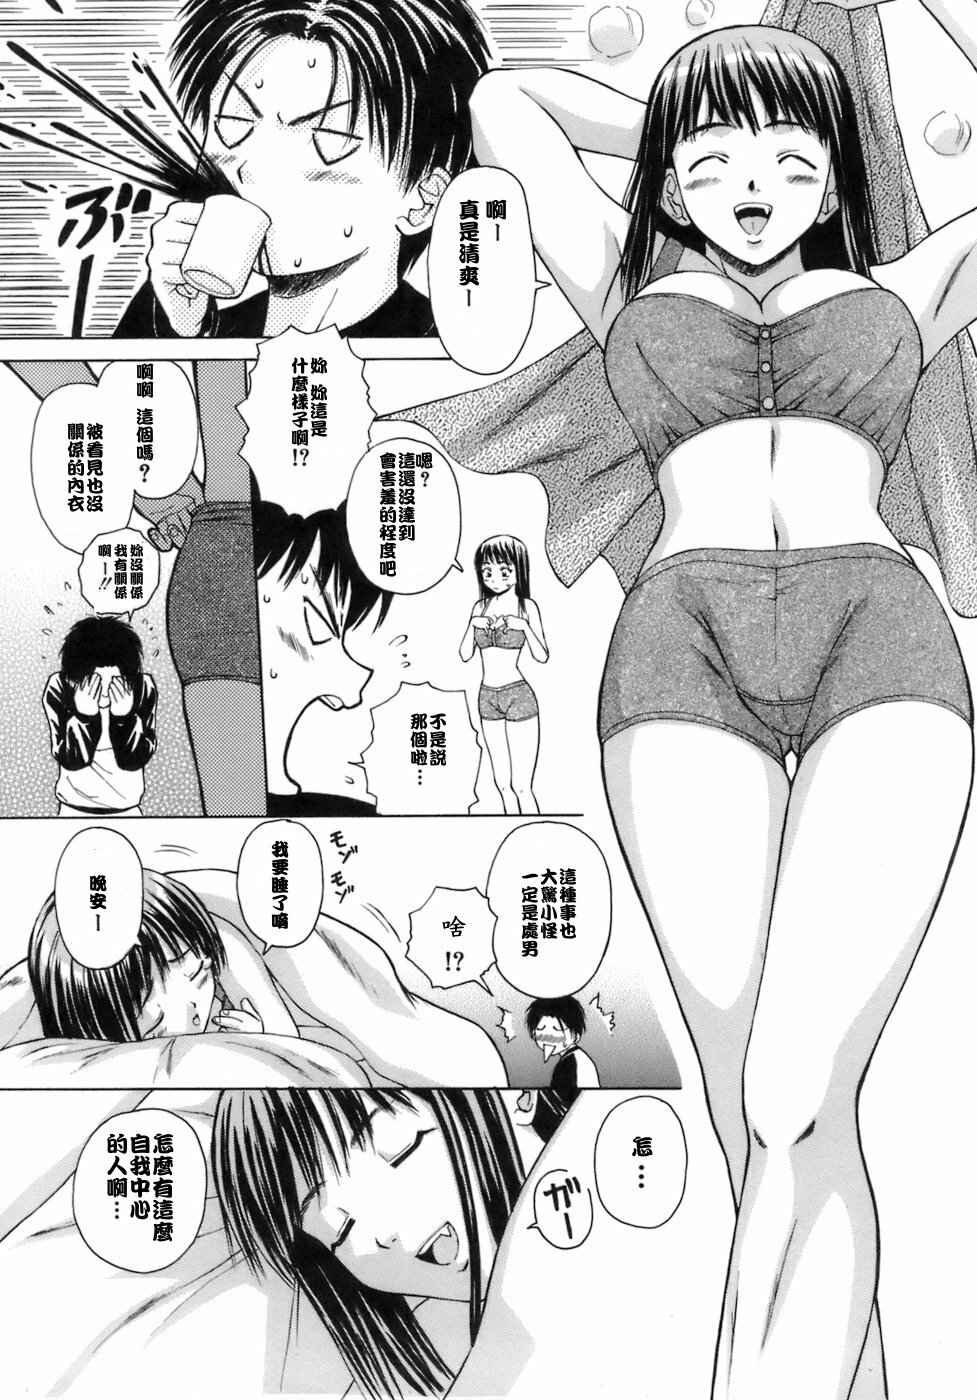 [Fuuga] Kyoushi to Seito to - Teacher and Student [Chinese] [悠月工房] page 14 full